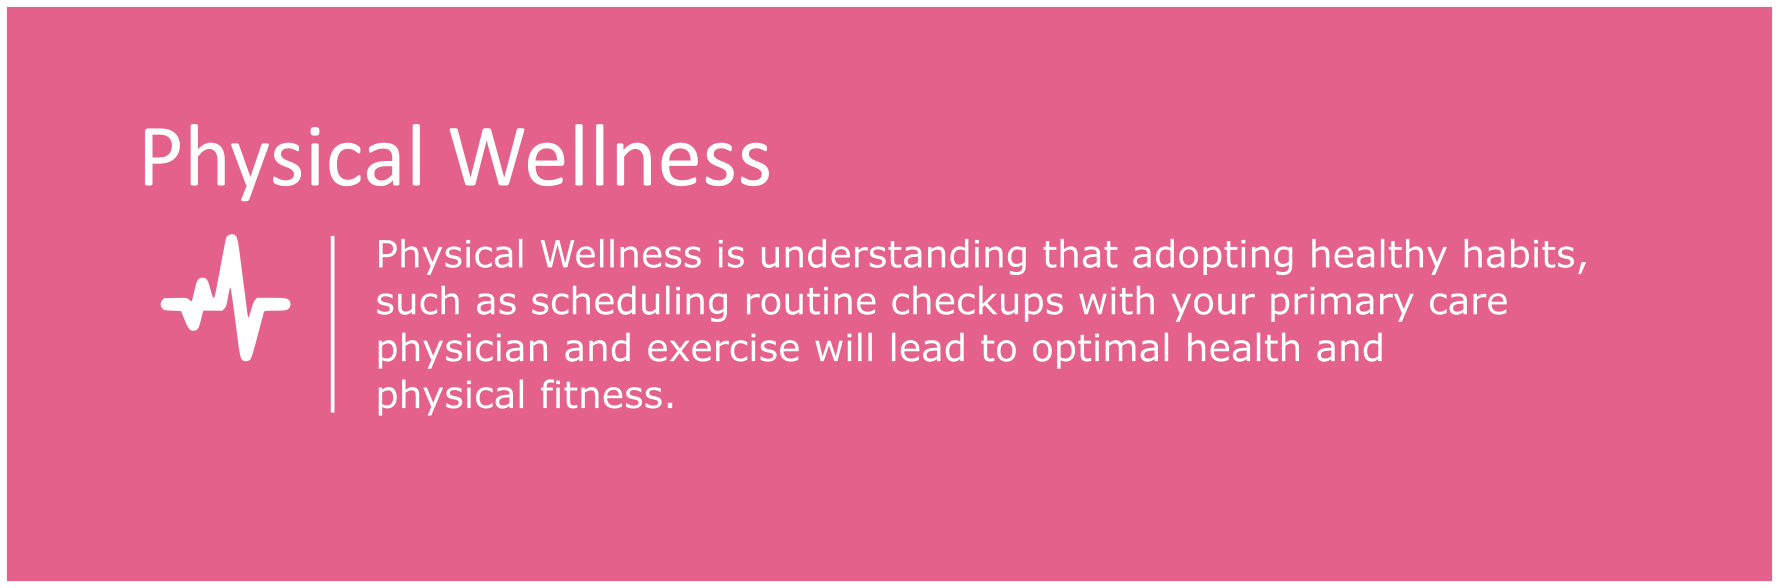 Physical Wellness is understanding that adopting healthy habits, such as scheduling routine checkups with your primary care physician and exercise, will lead to optimal health and physical wellness.